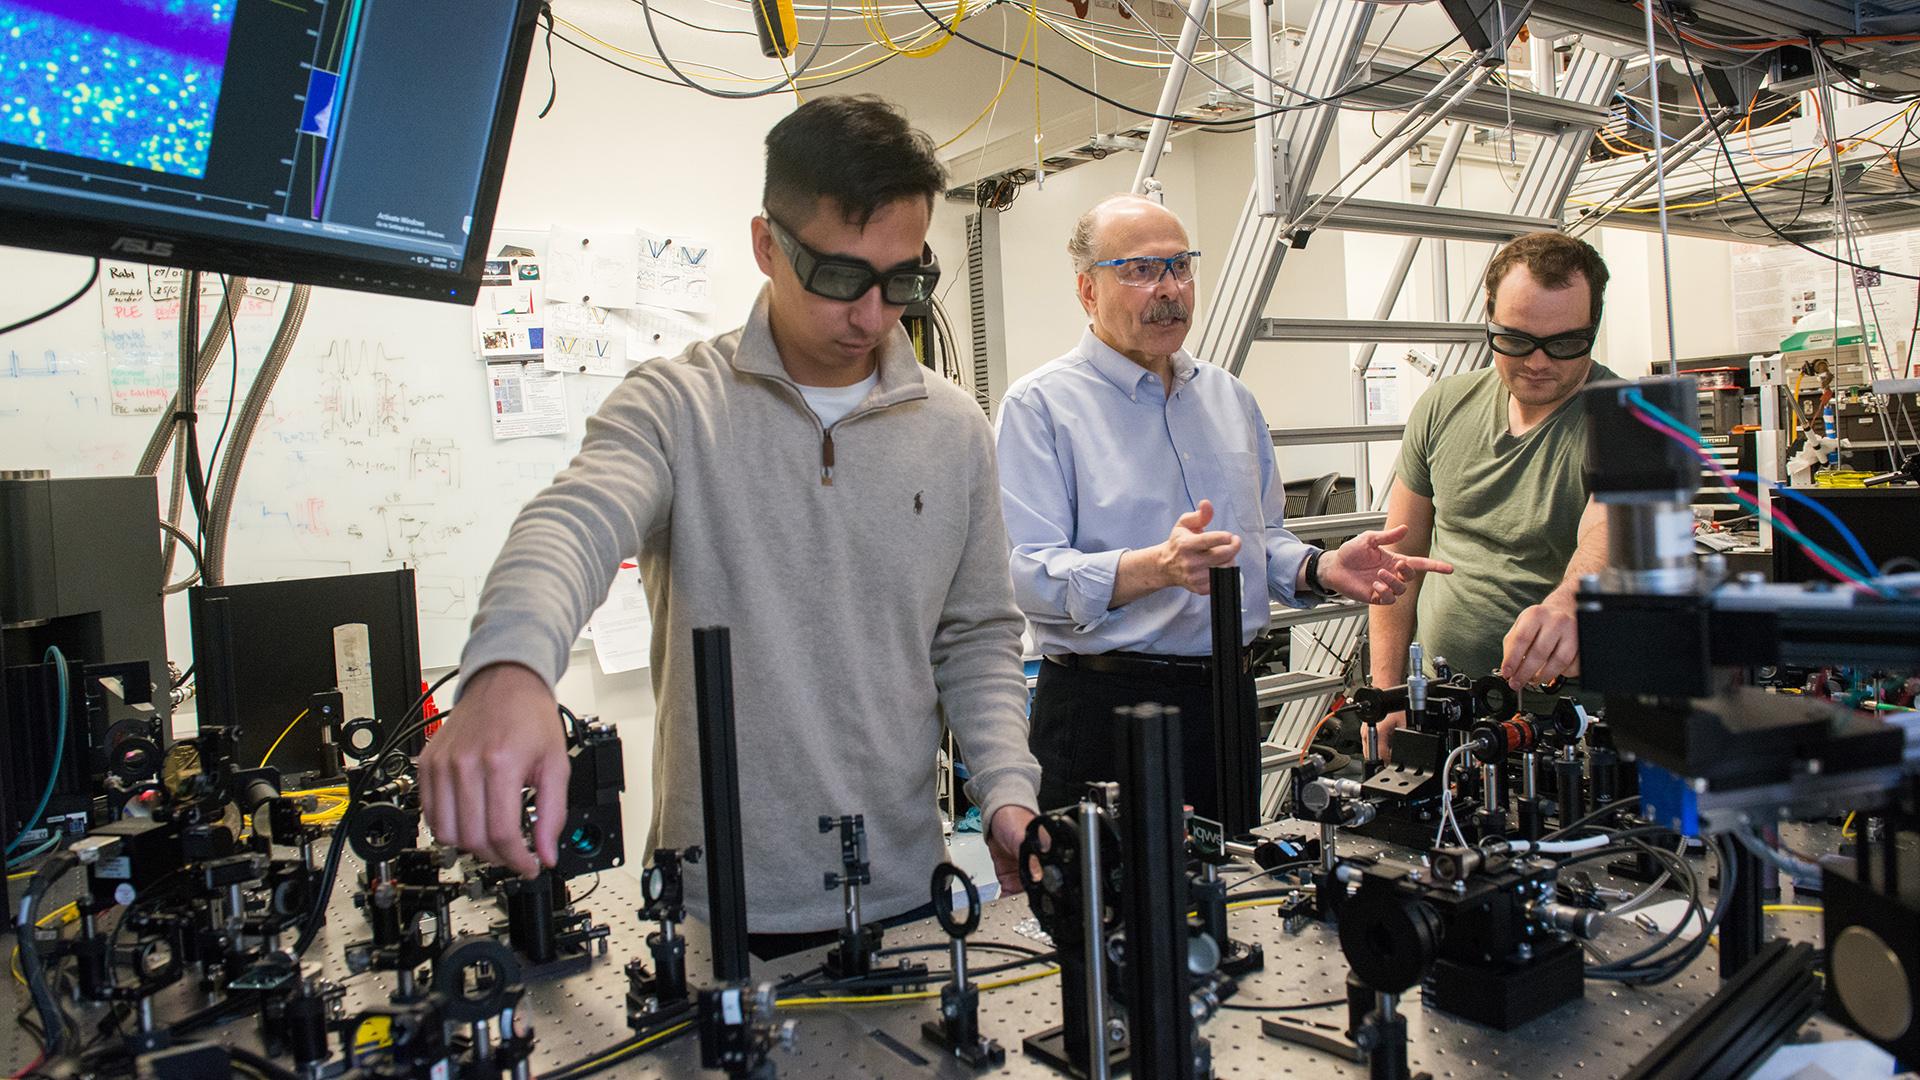 University of Chicago researcher David D. Awschalom in his lab with Ph.D. students Kevin Miao, left, and Alexandre Bourassa, on Oct. 15, 2018. (Photo by Jean Lachat)